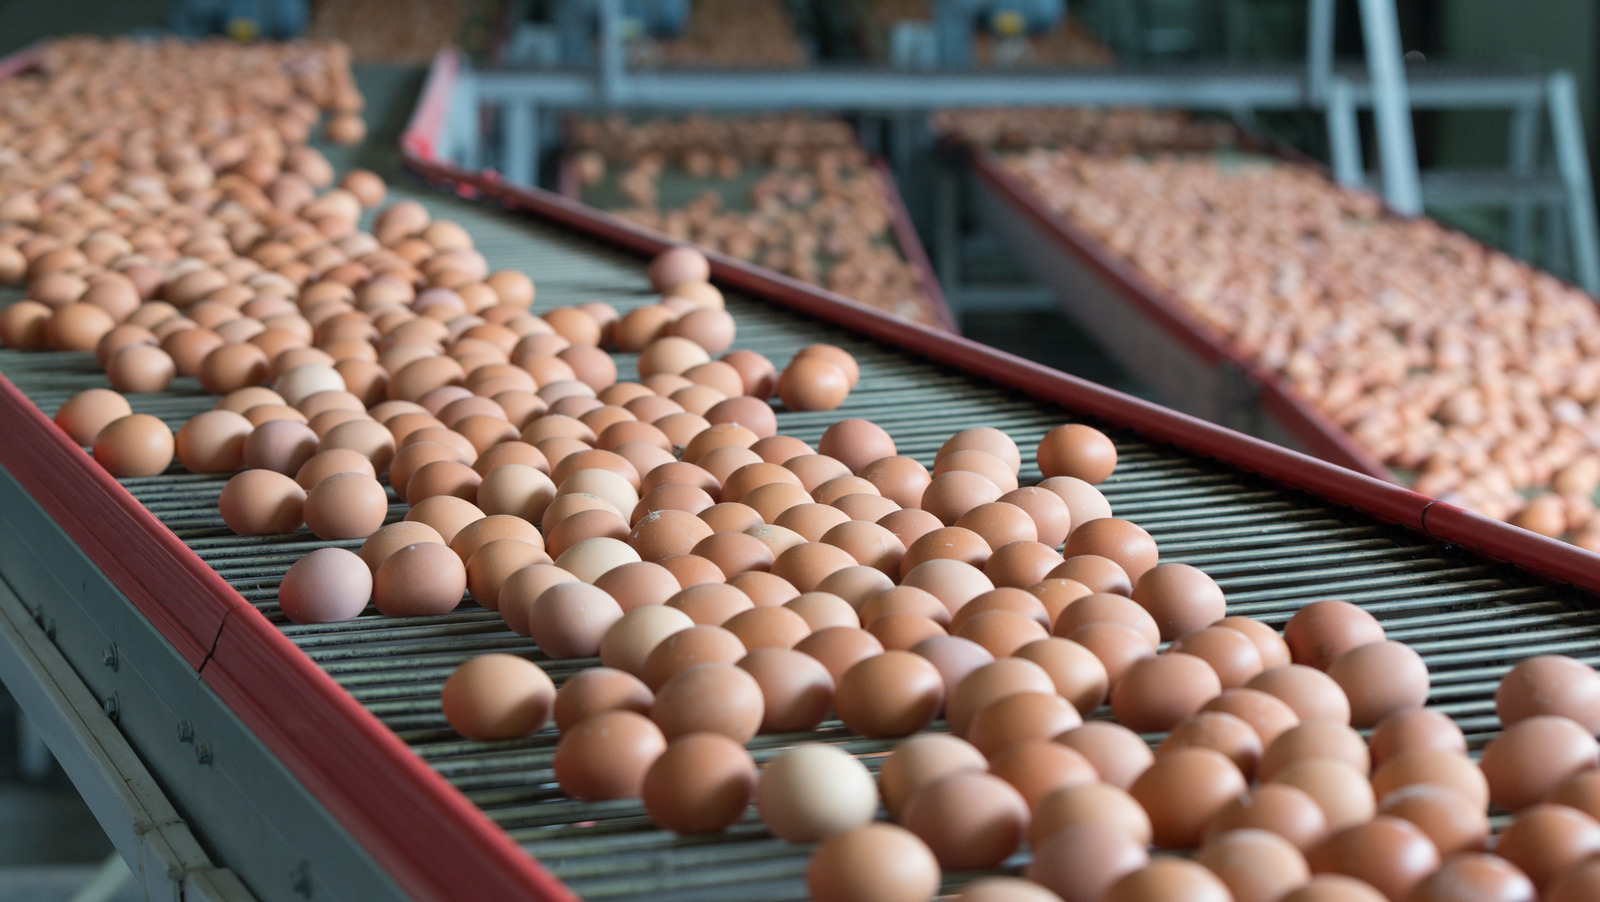 Why Massachusetts Might Soon Experience An Egg Shortage